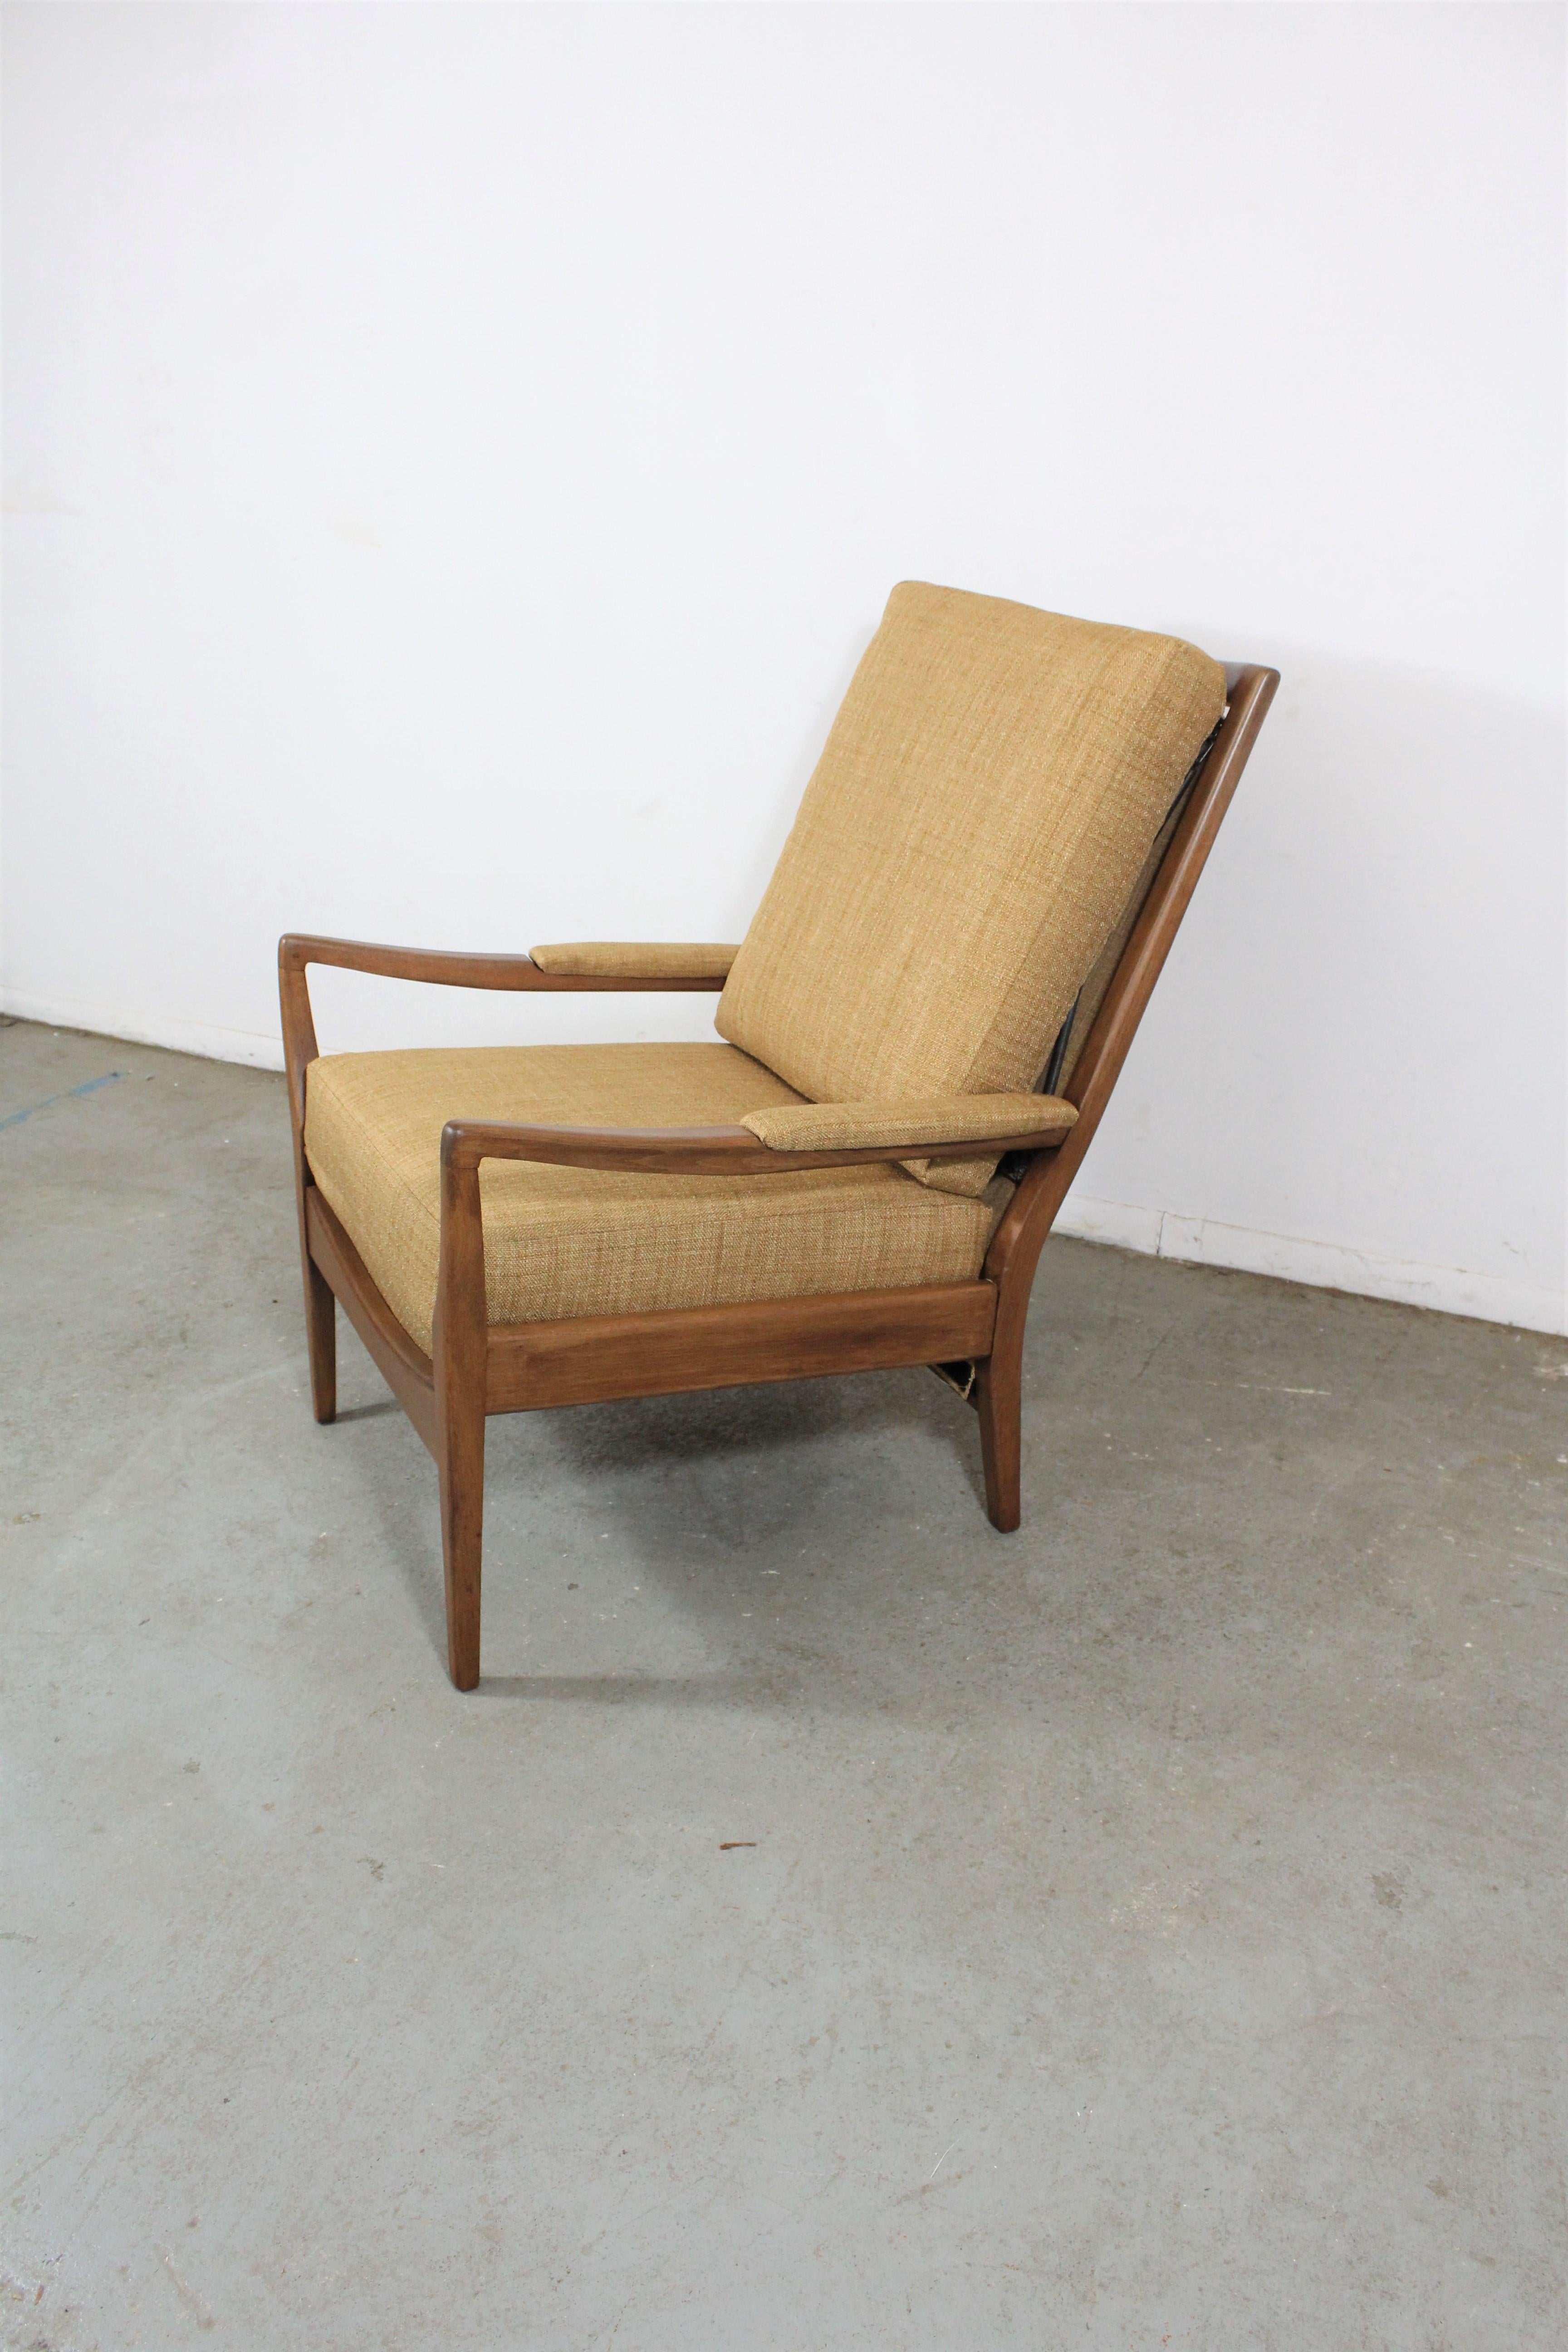 Mid Century Modern Walnut Open Arm Lounge Chair

Offered is a beautifully redone lounge chair by Cintique. It has been completely restored. It is in great condition with mild age wear. It has no straps or cords, but instead has its own spring